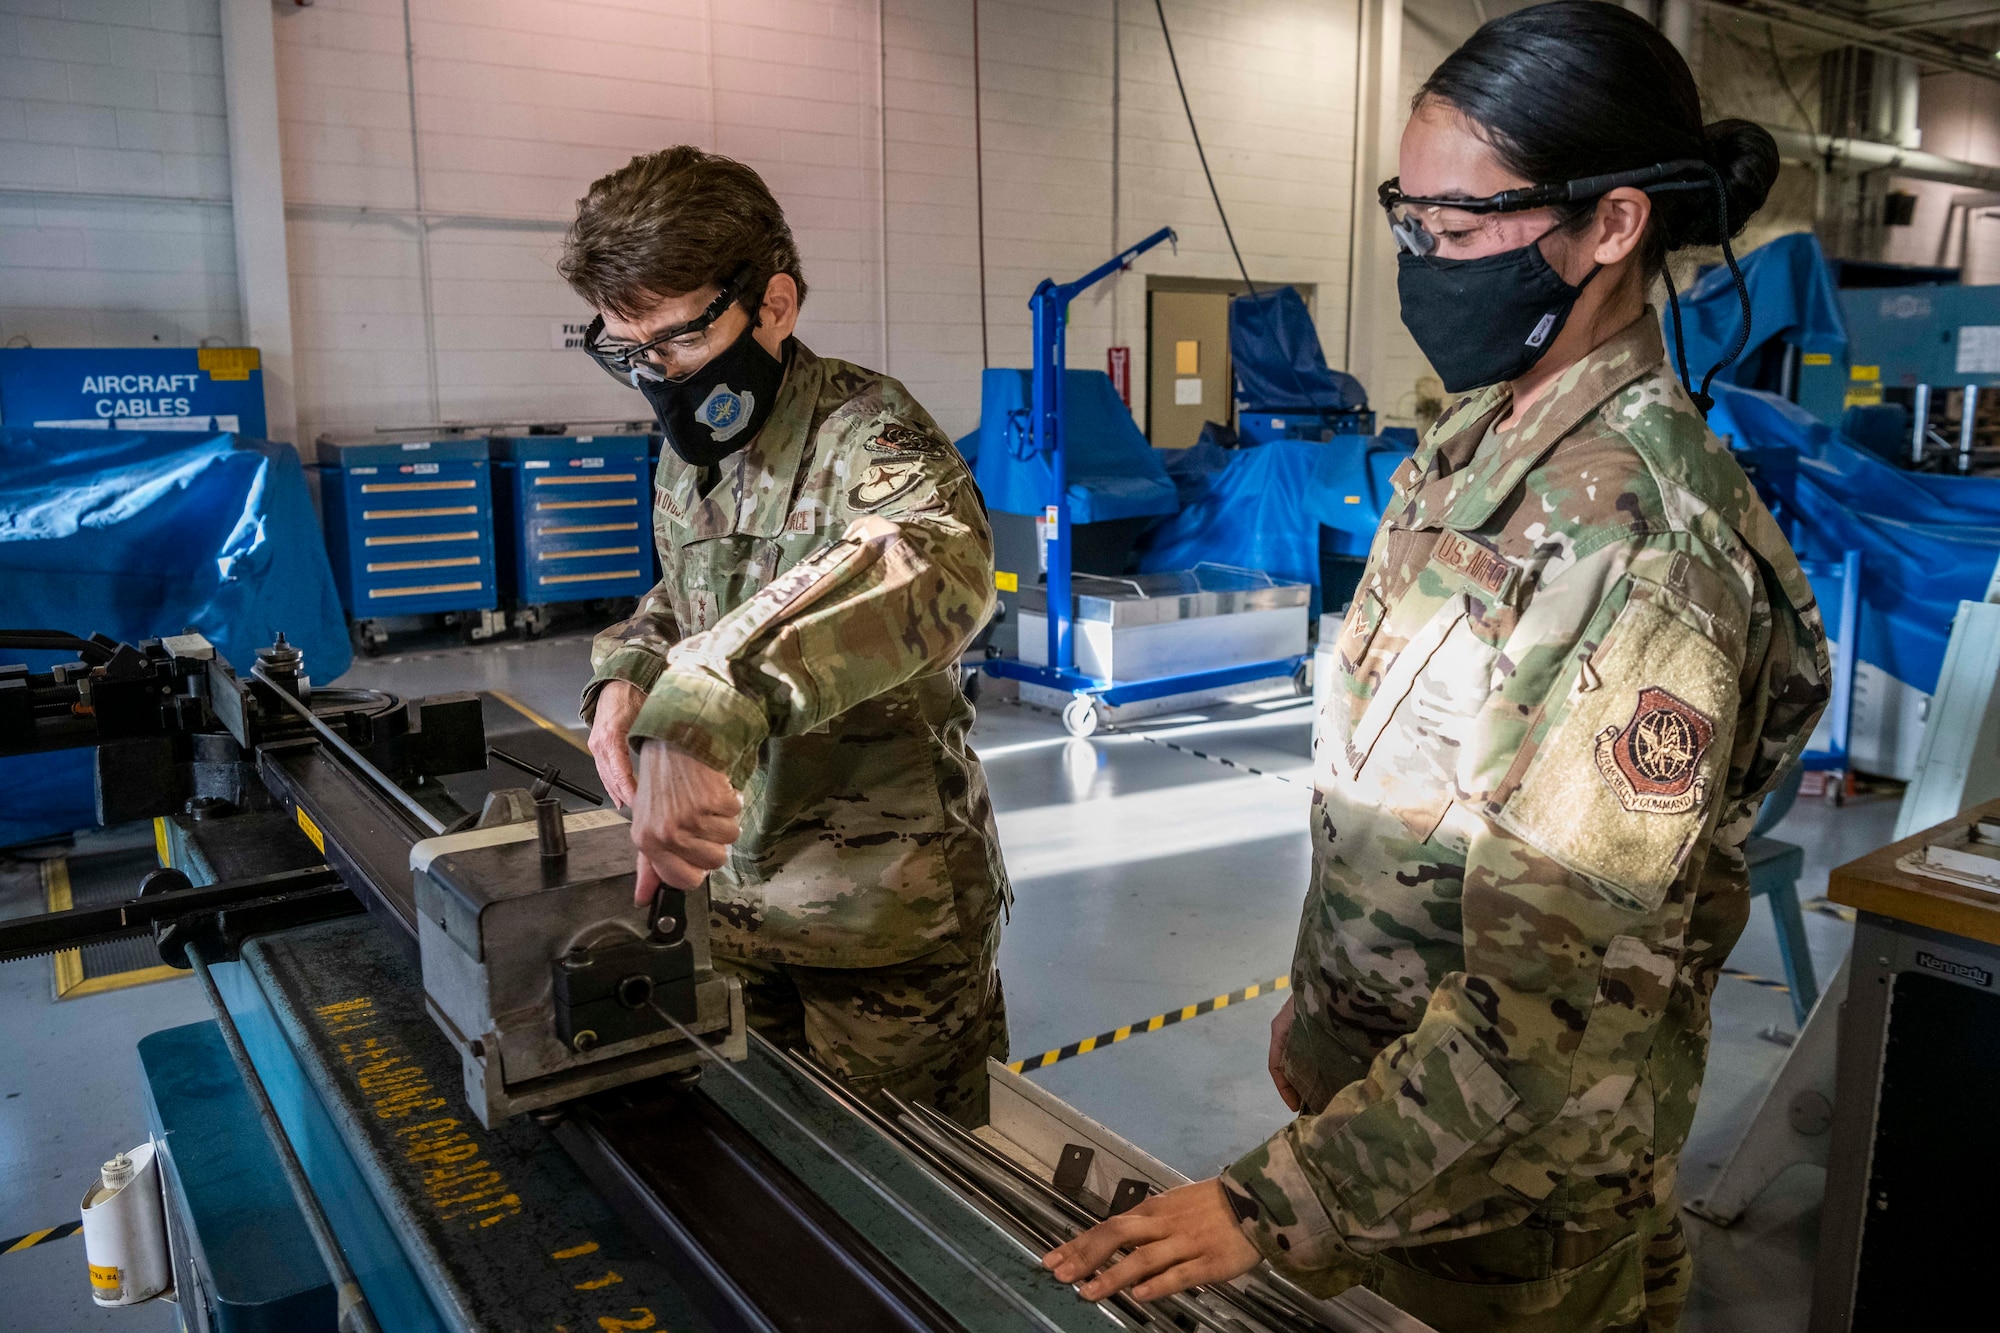 Airman 1st Class Sheila Tilden, 436th Maintenance Squadron aircraft structural maintenance journeyman, shows Gen. Jacqueline Van Ovost, Air Mobility Command commander, how to manufacture tubing for aircraft at Dover Air Force Base, Delaware, Dec. 8, 2020. During her visit, Van Ovost experienced firsthand how Dover AFB supports AMC’s priority of enhancing full-spectrum readiness and developing innovative, multi-capable Airmen. (U.S. Air Force photo by Senior Airman Christopher Quail)